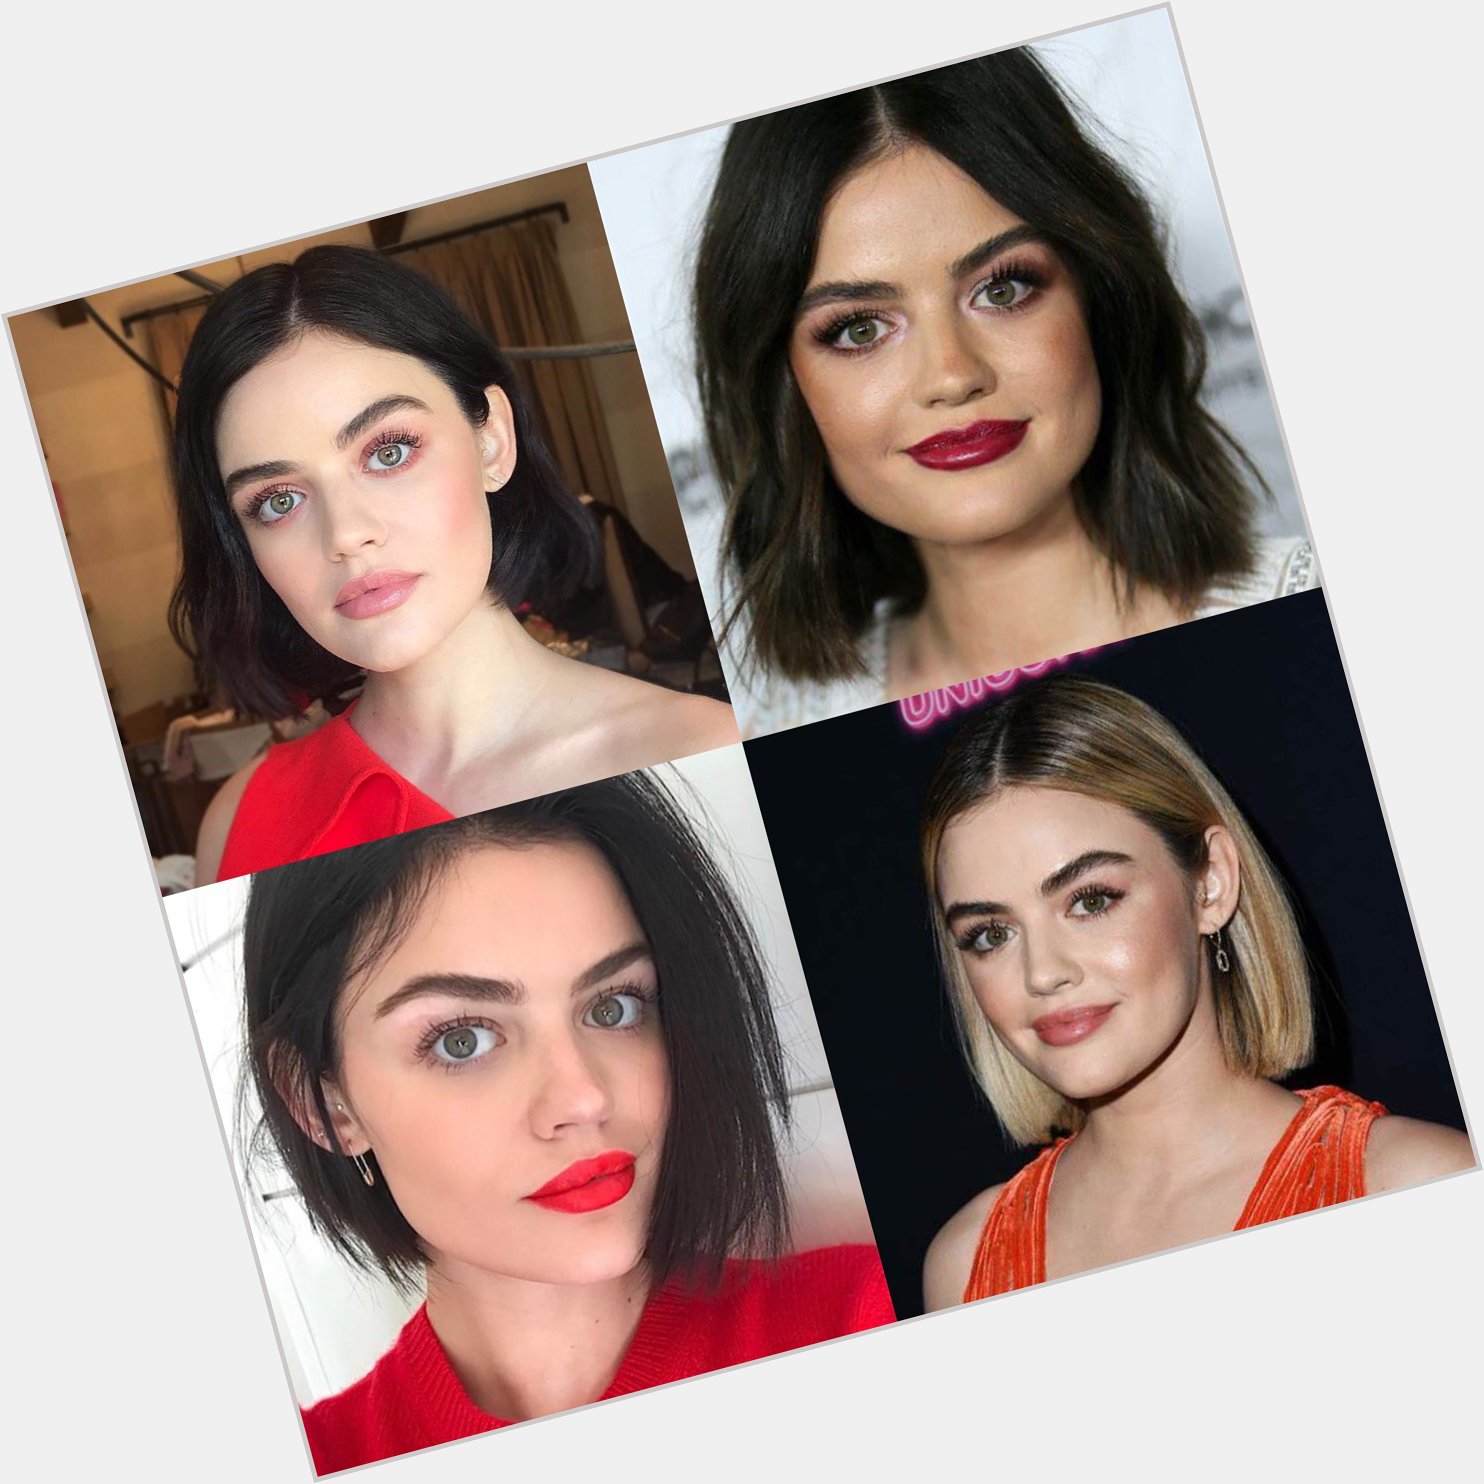 Happy 31 birthday to lucy Hale . Hope that she has a wonderful birthday.       